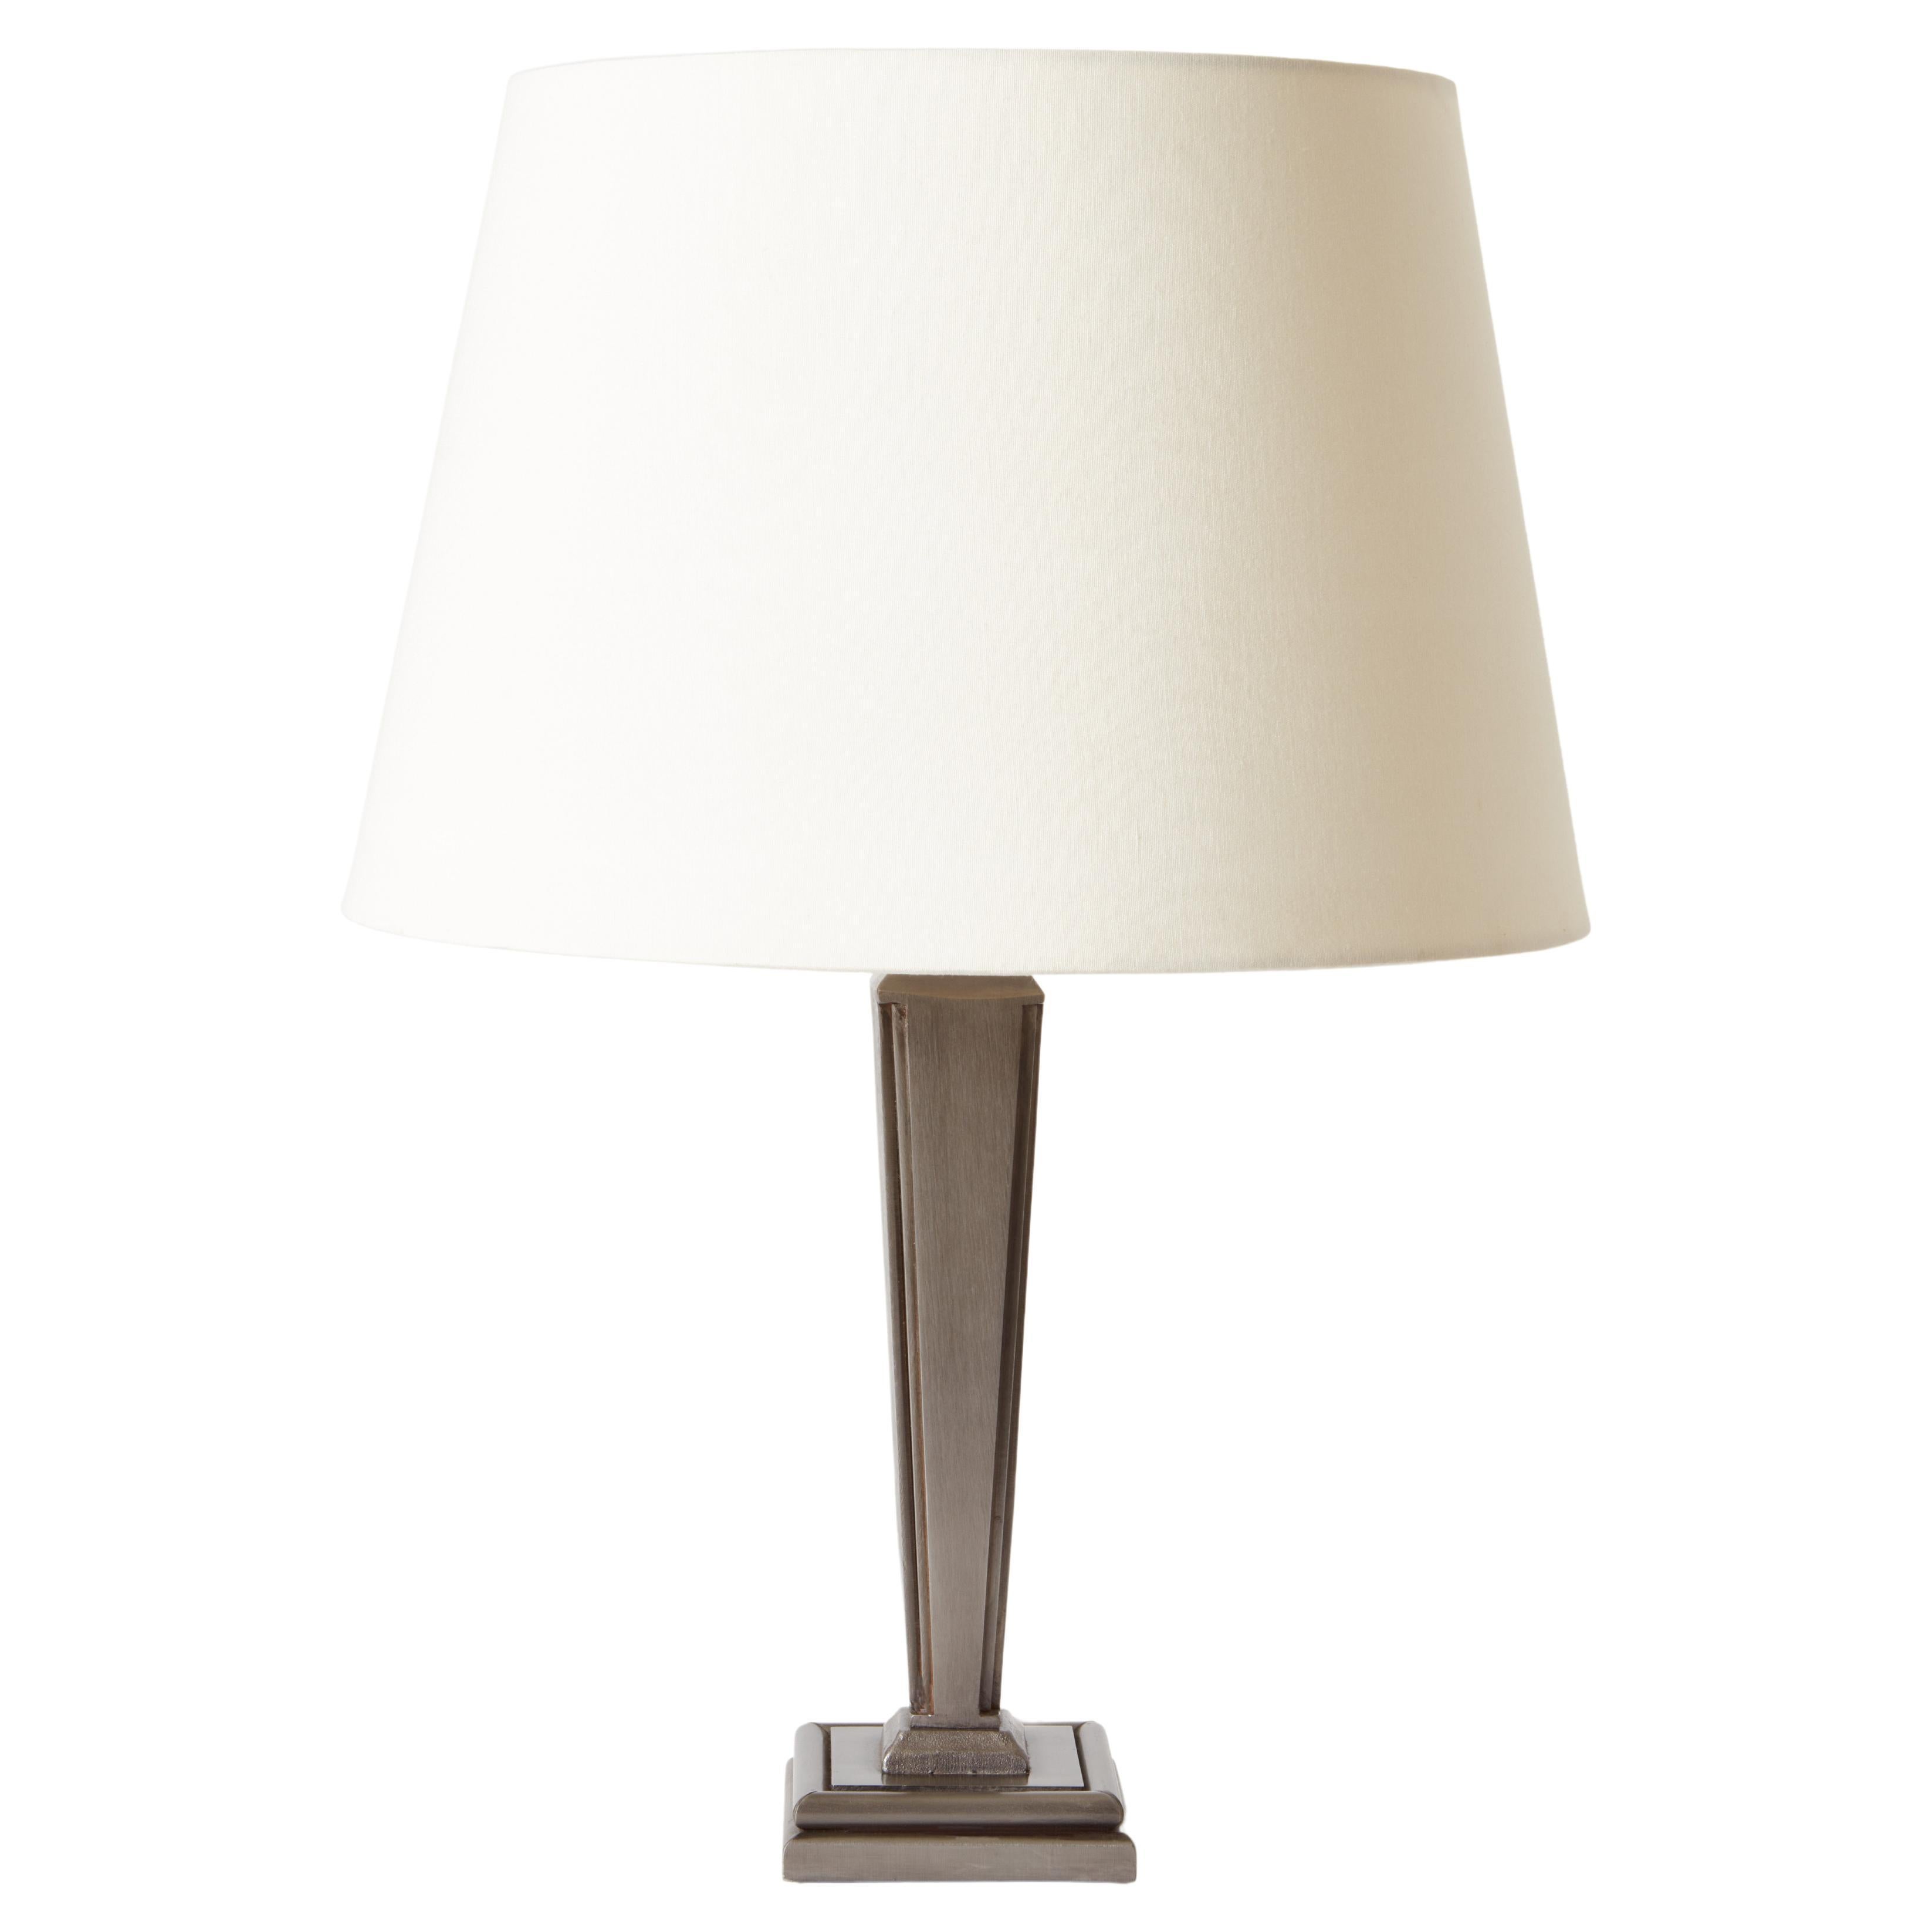 Contemporary Neoclassical 'Inverted' Table Lamp For Sale